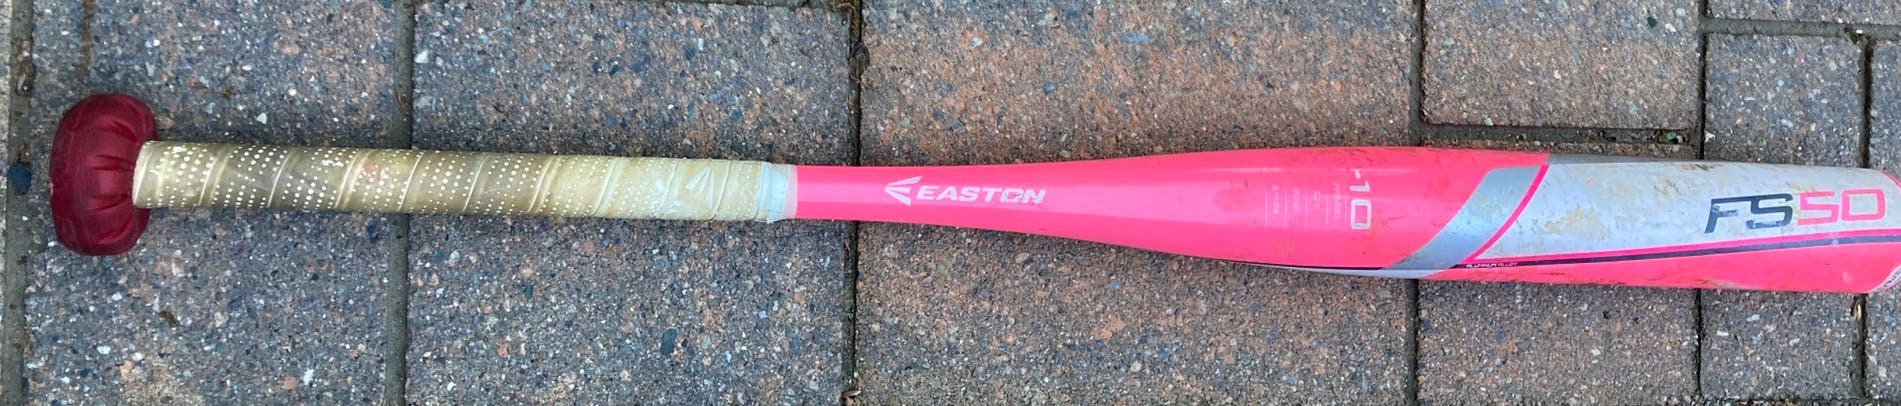 Easton FS50 30” FastPitch Speed Brigade Well loved Pink and Silver Bat